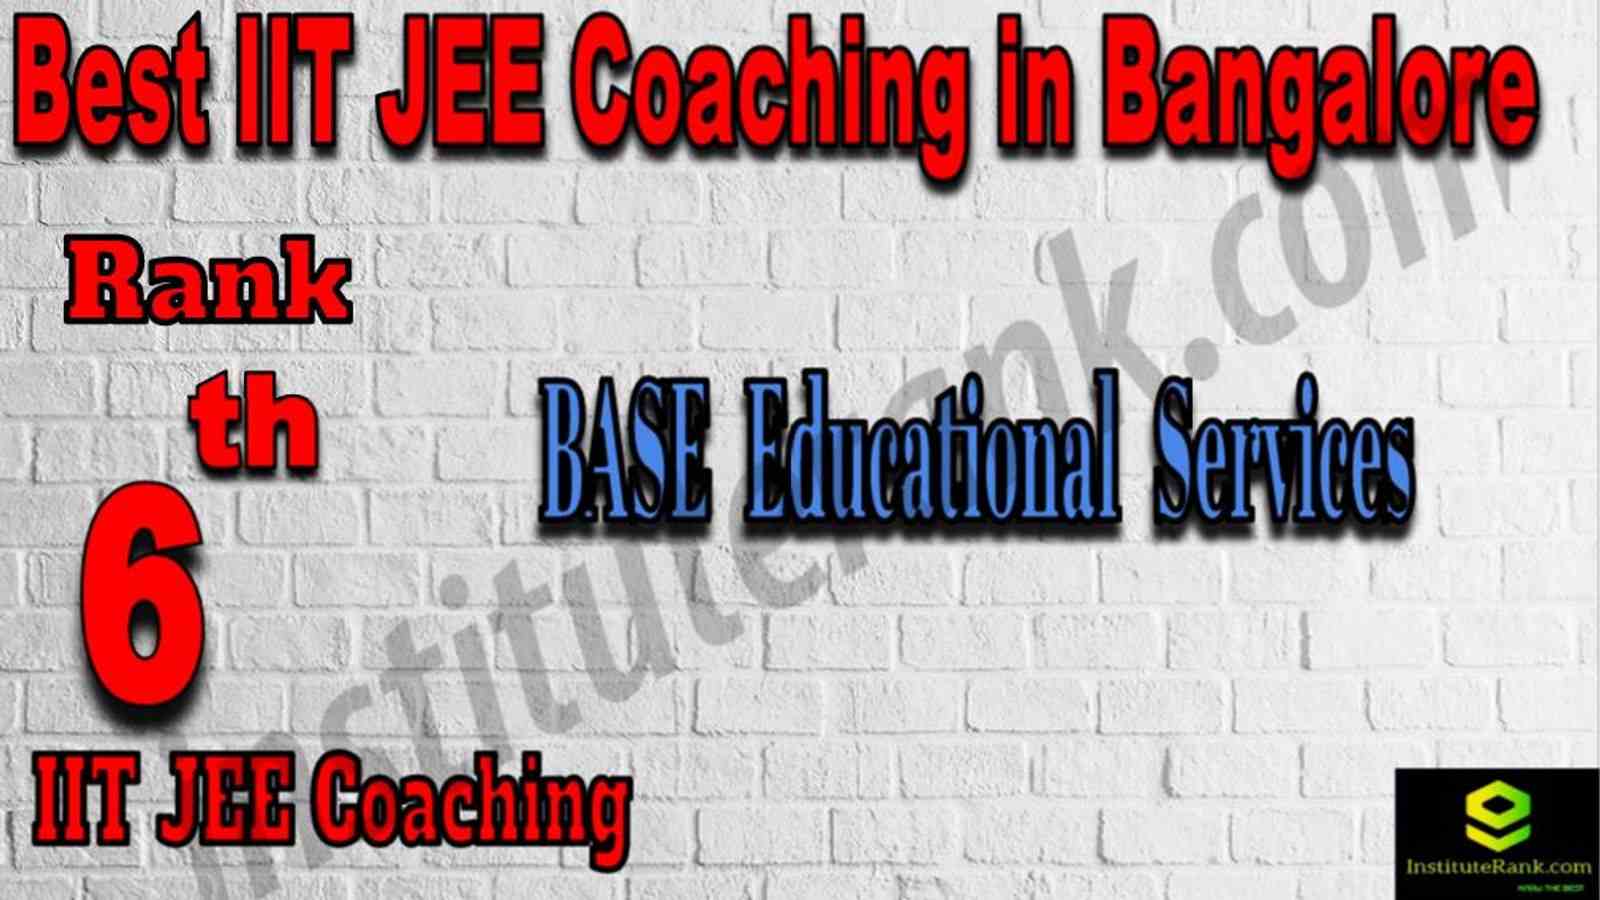 6th Best IIT JEE Coaching in Bangalore